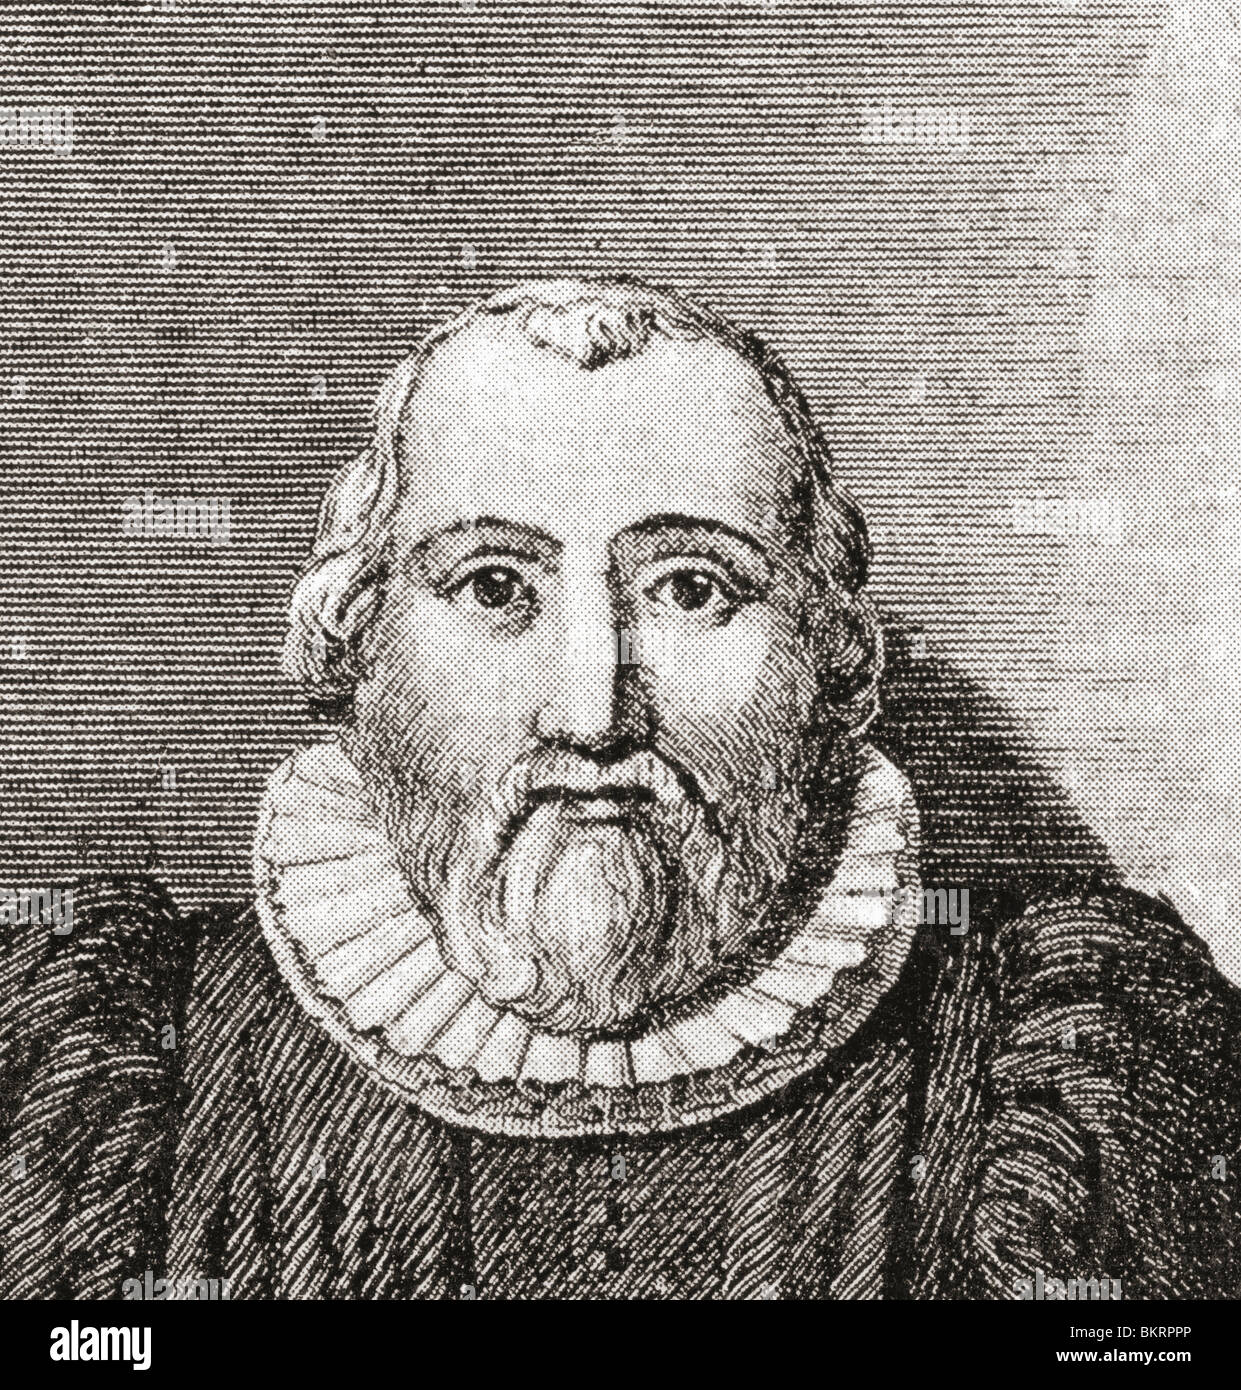 Robert Burton, 1577 to 1640. English scholar and vicar at Oxford University, best known for writing The Anatomy of Melancholy. Stock Photo